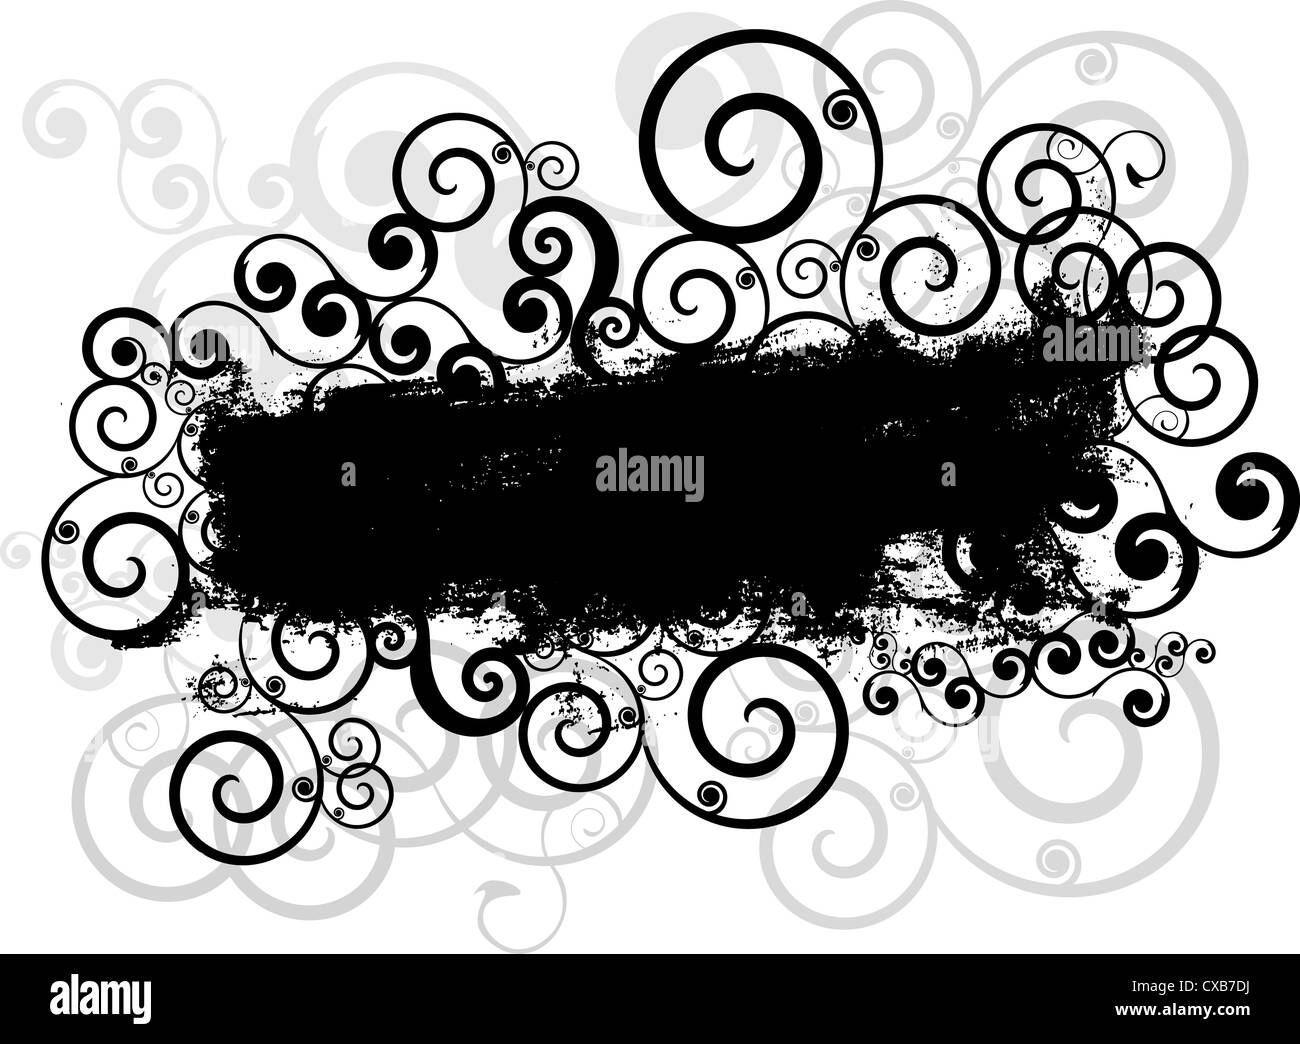 Grunge style background with swirls and curls Stock Photo